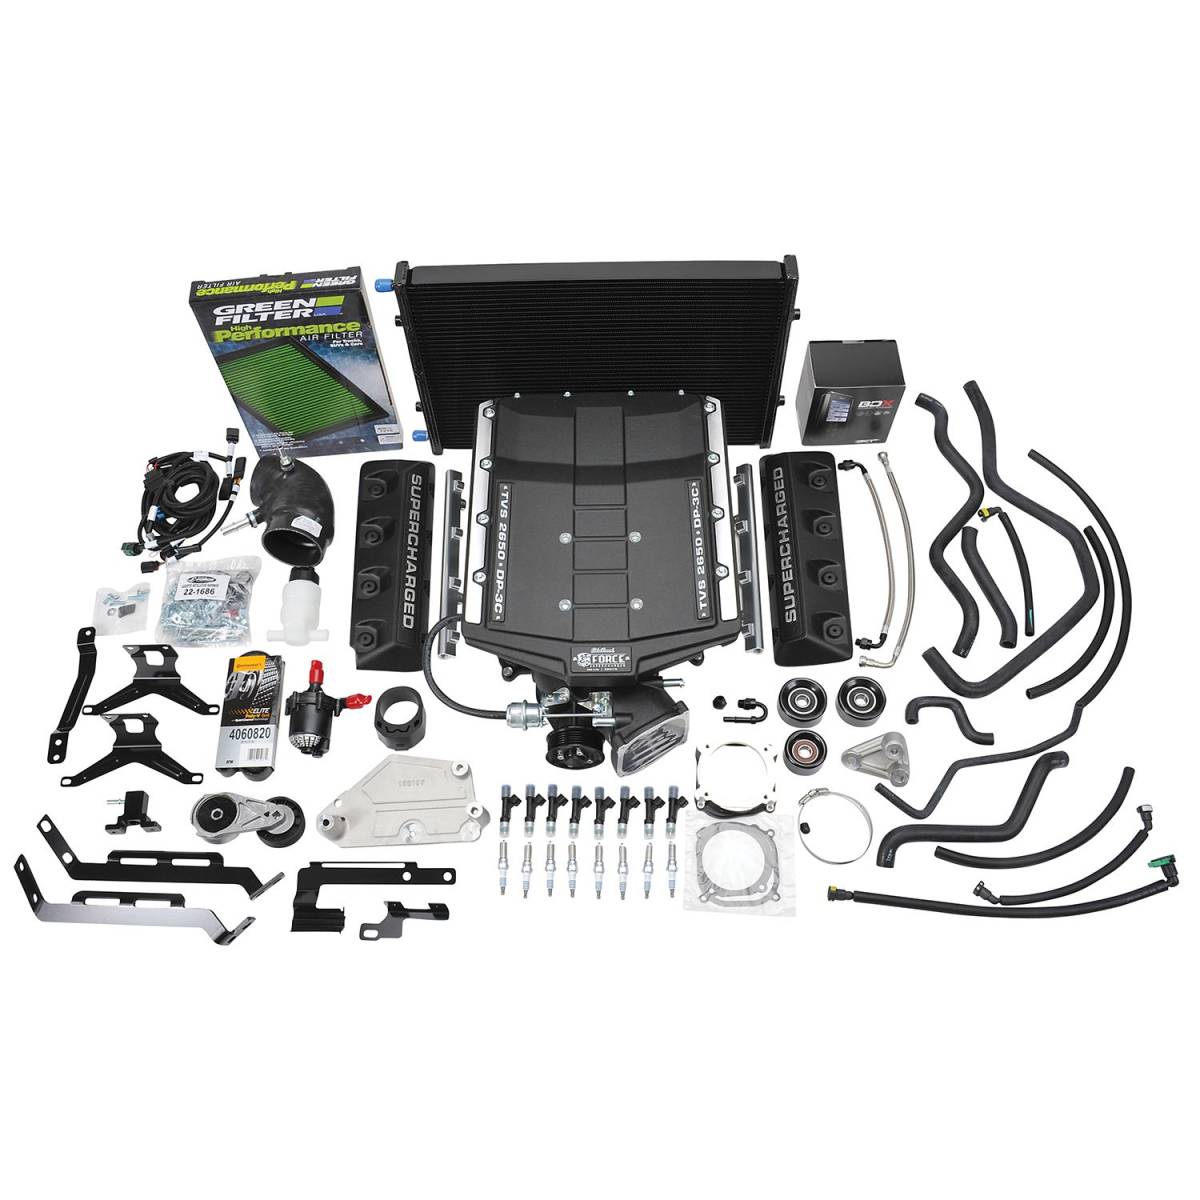 Edelbrock - Ford Mustang 5.0L 2015-2017 Edelbrock Stage 1 Complete Supercharger Intercooled Kit Without Tune - Image 1